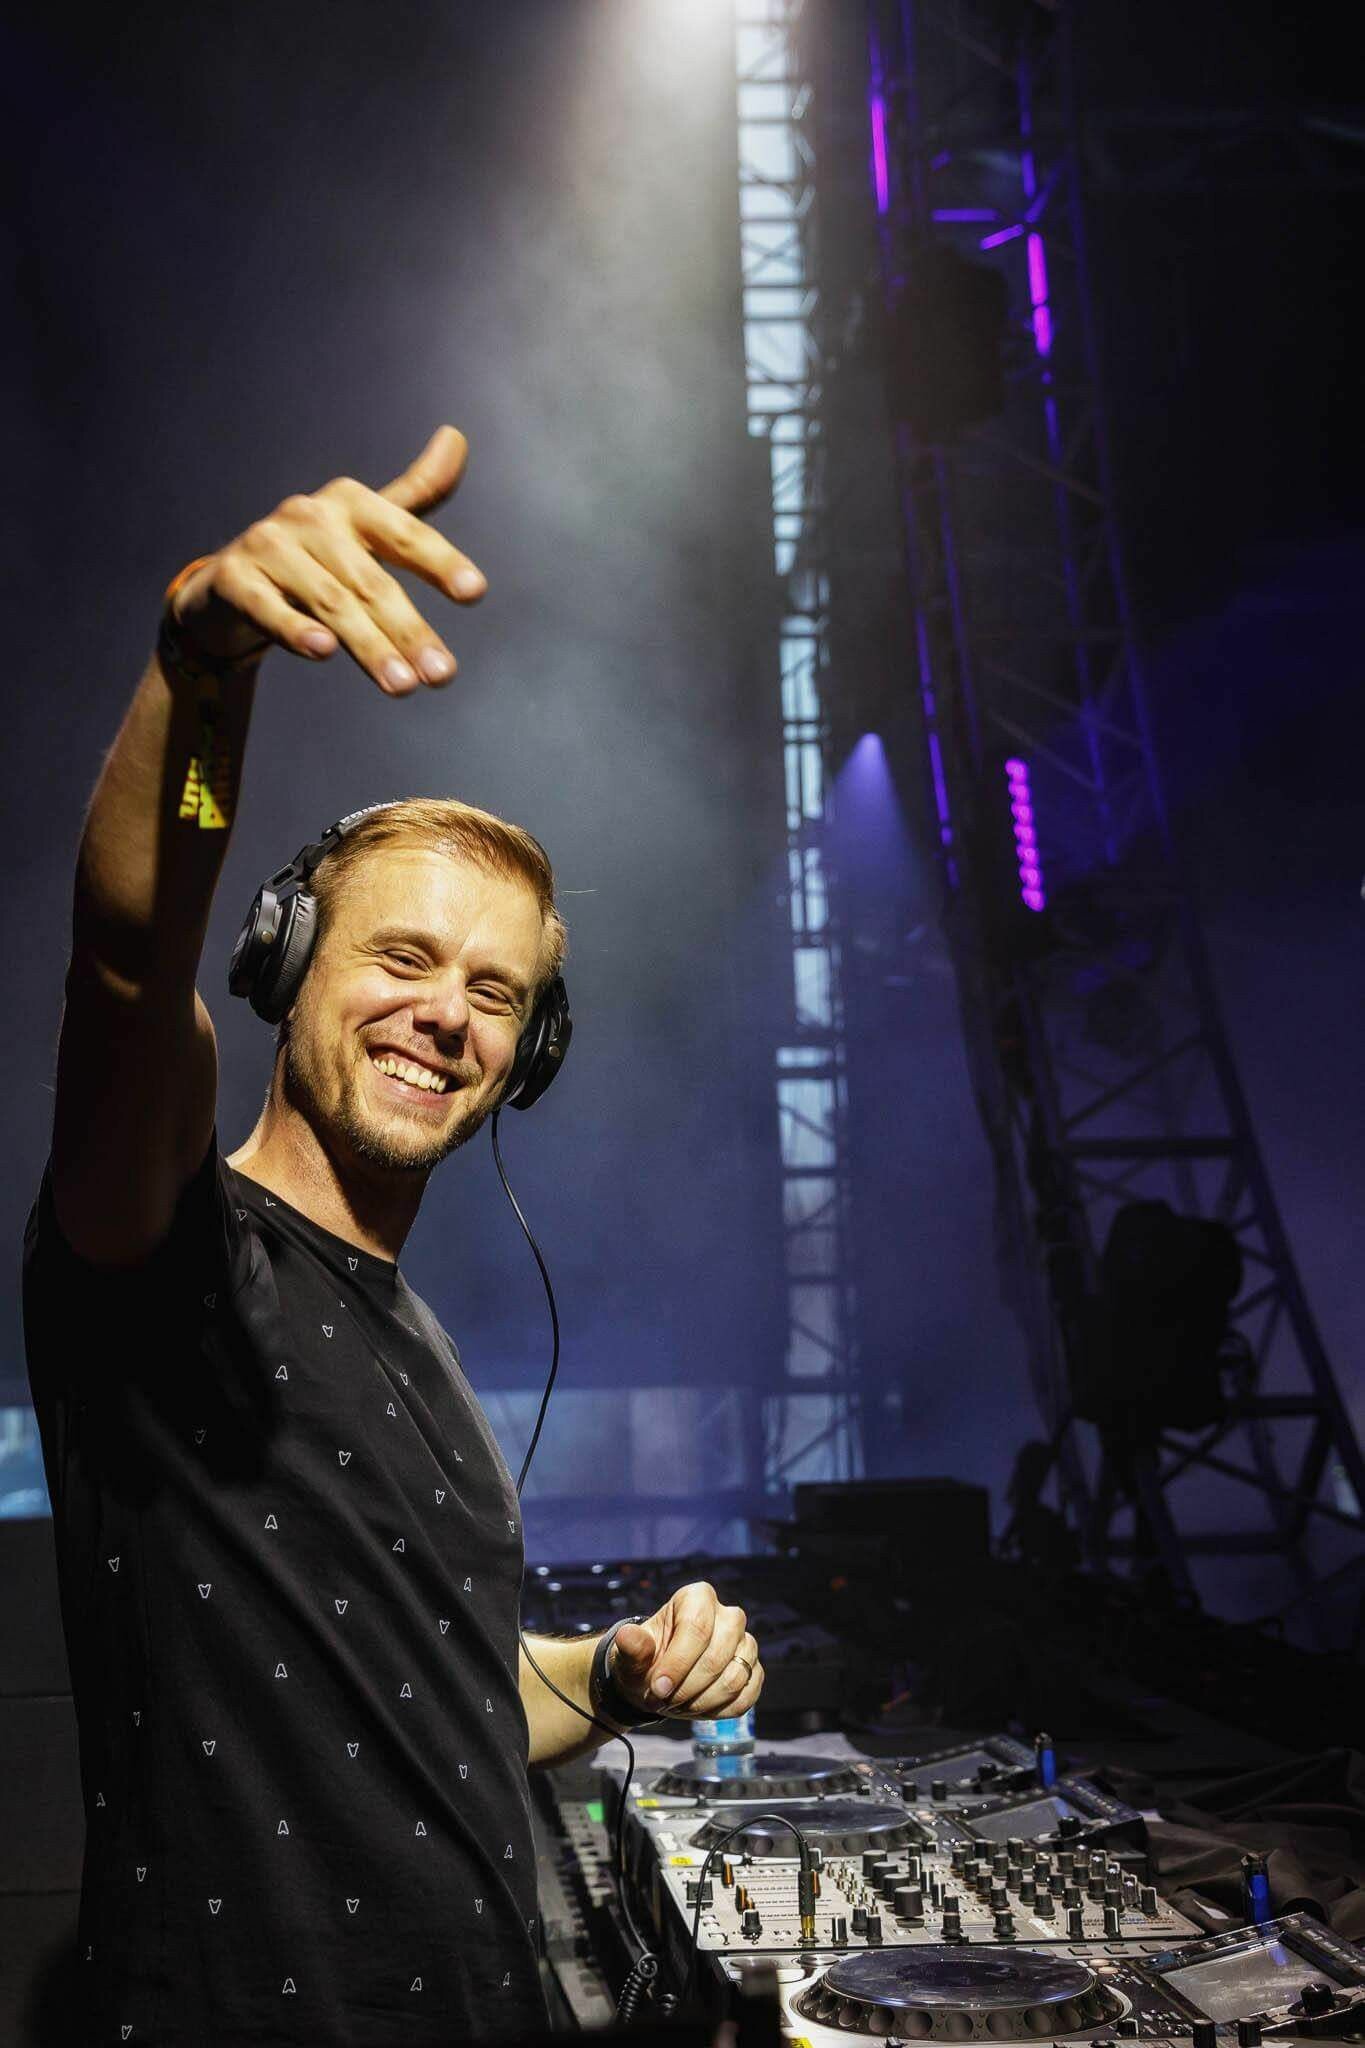 Armin Van Buuren: EDM festival, Electronic dance music, He was elected the best DJ in the world in the 2007 DJ Mag edition. 1370x2050 HD Wallpaper.